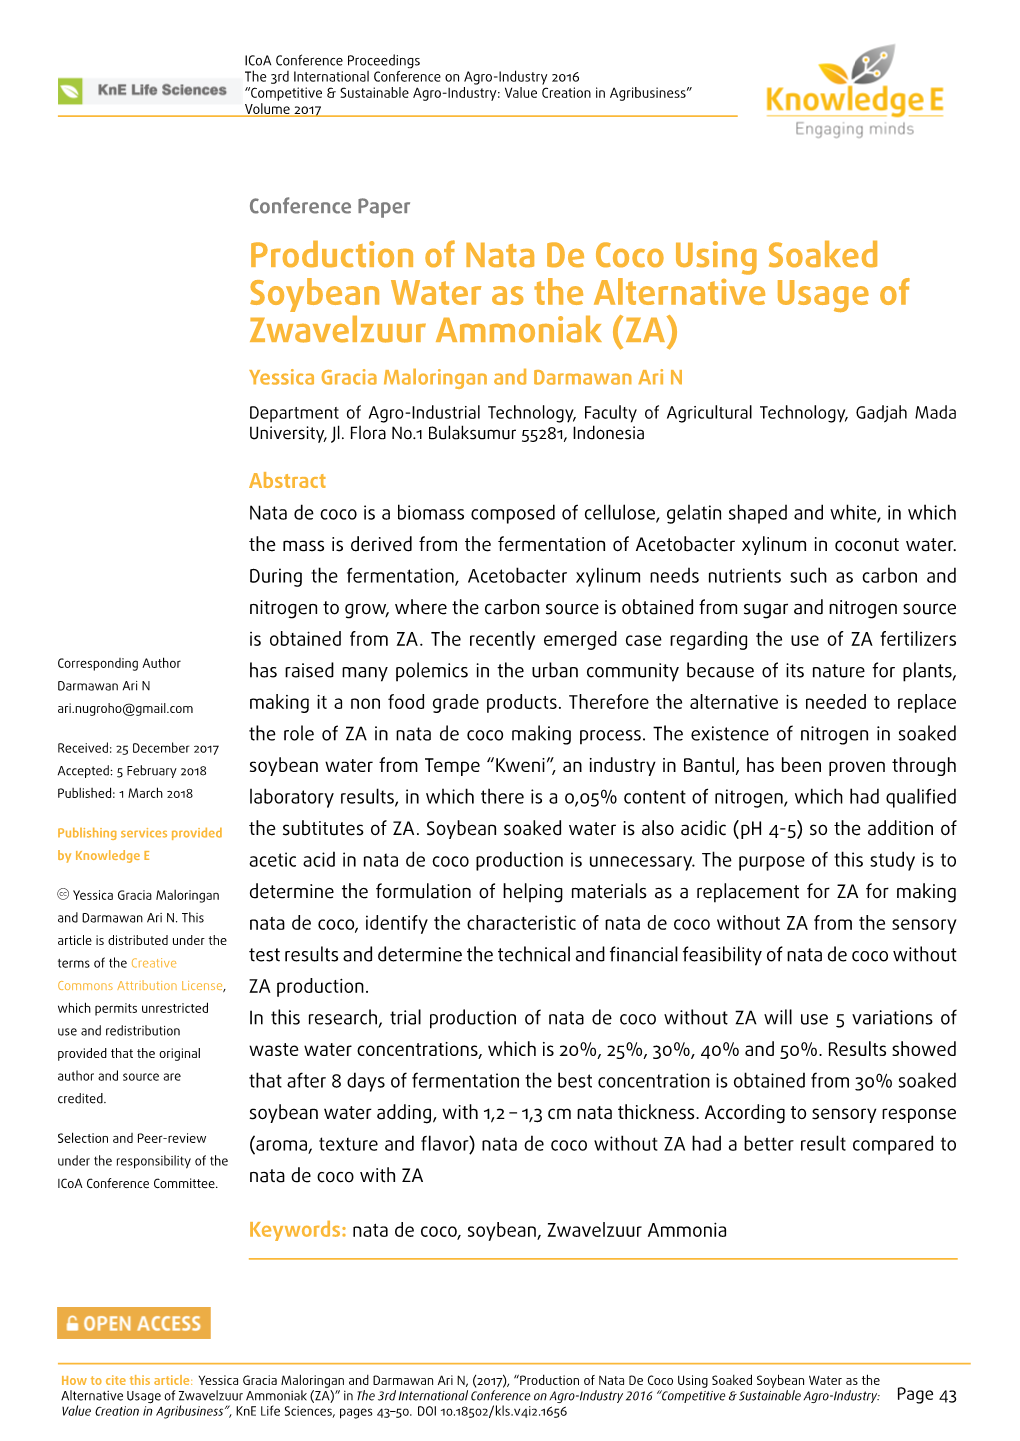 Production of Nata De Coco Using Soaked Soybean Water As the Alternative Usage of Zwavelzuur Ammoniak